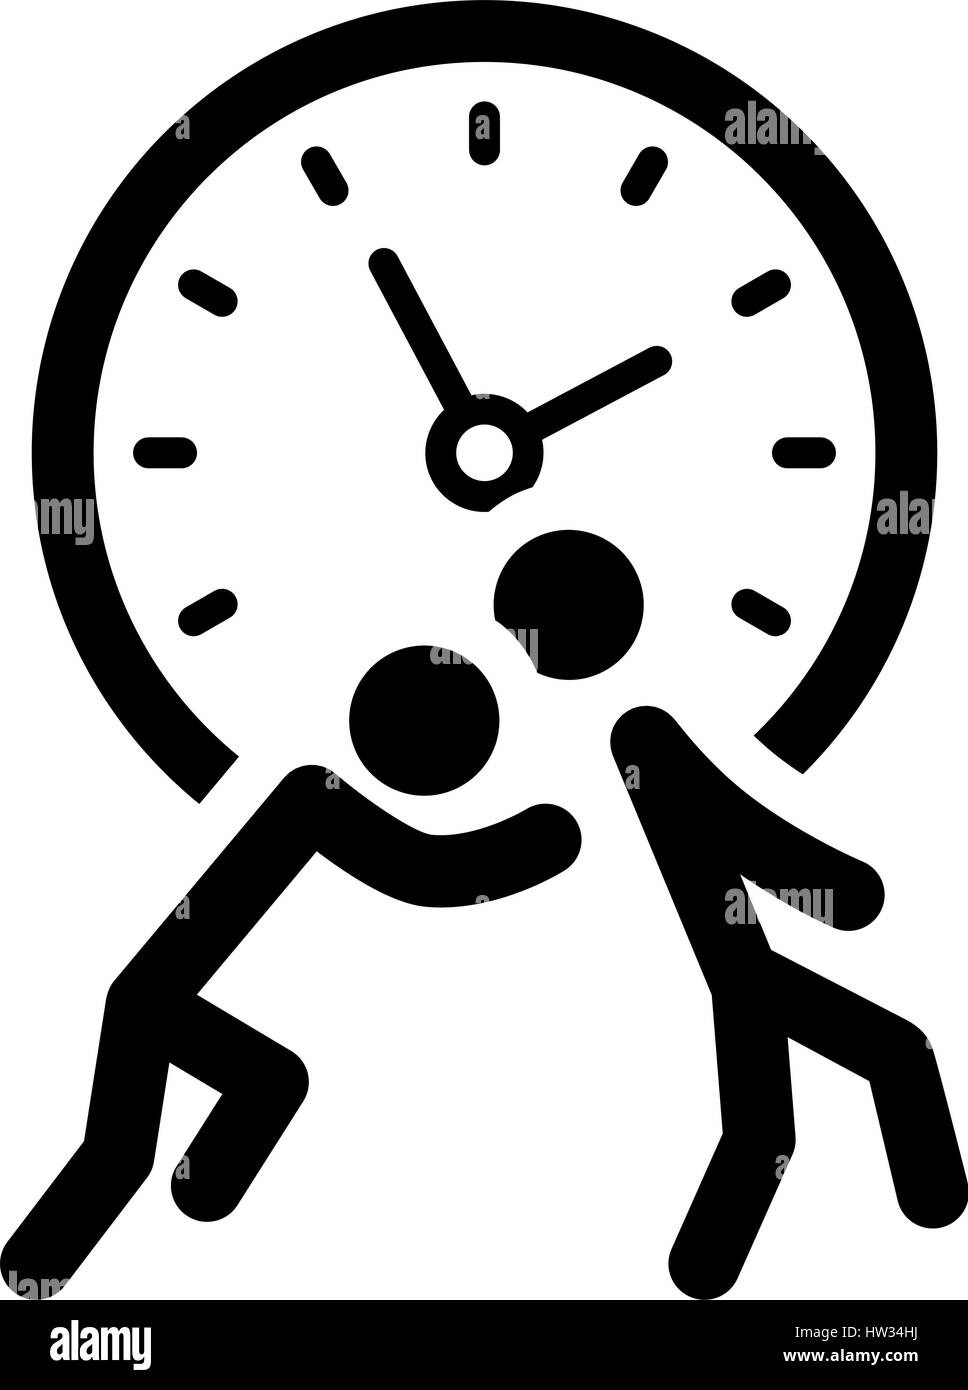 Time for Action Icon. Flat Design. Stock Vector